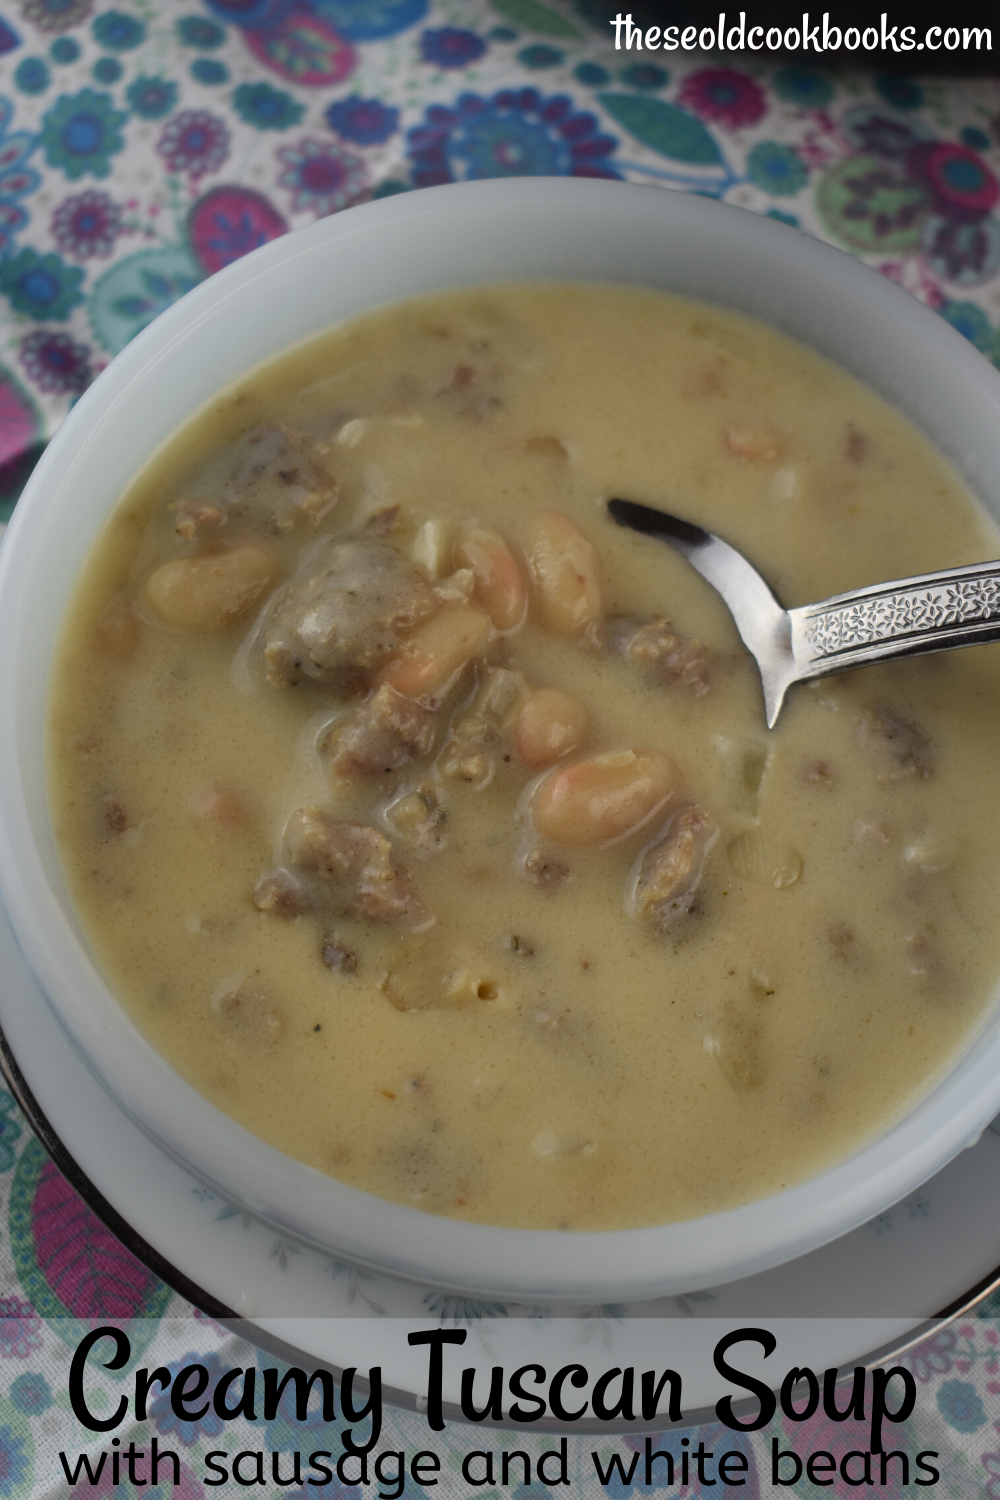 This Tuscan Sausage and White Bean Soup recipe is an easy meal to make and customize to your own tastes.